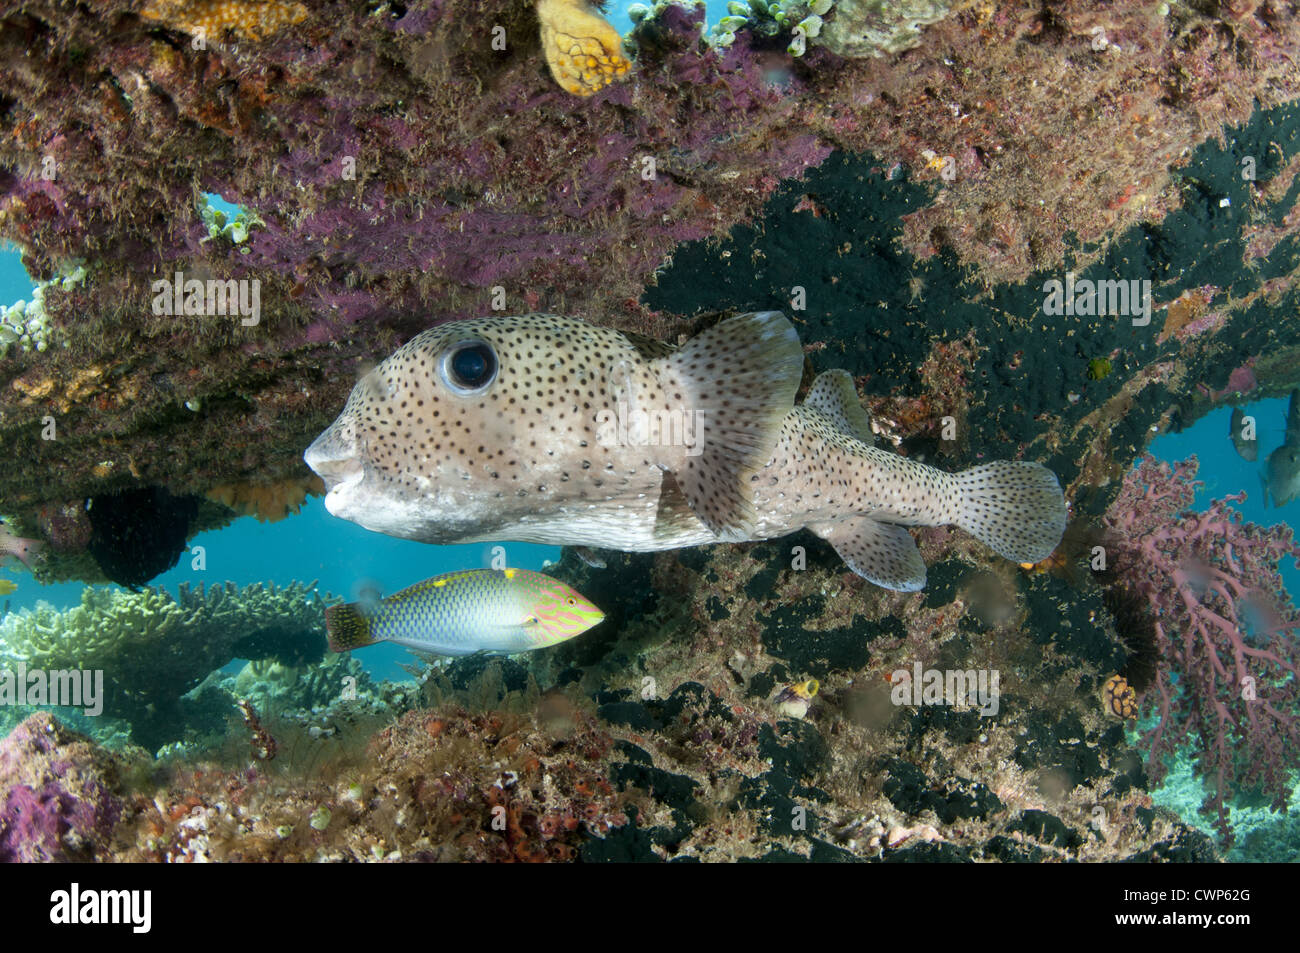 Star Pufferfish (Arothron stellatus) and Checkerboard Wrasse (Halichoeres hortulanus) adults, swimming under table coral ledge, Stock Photo